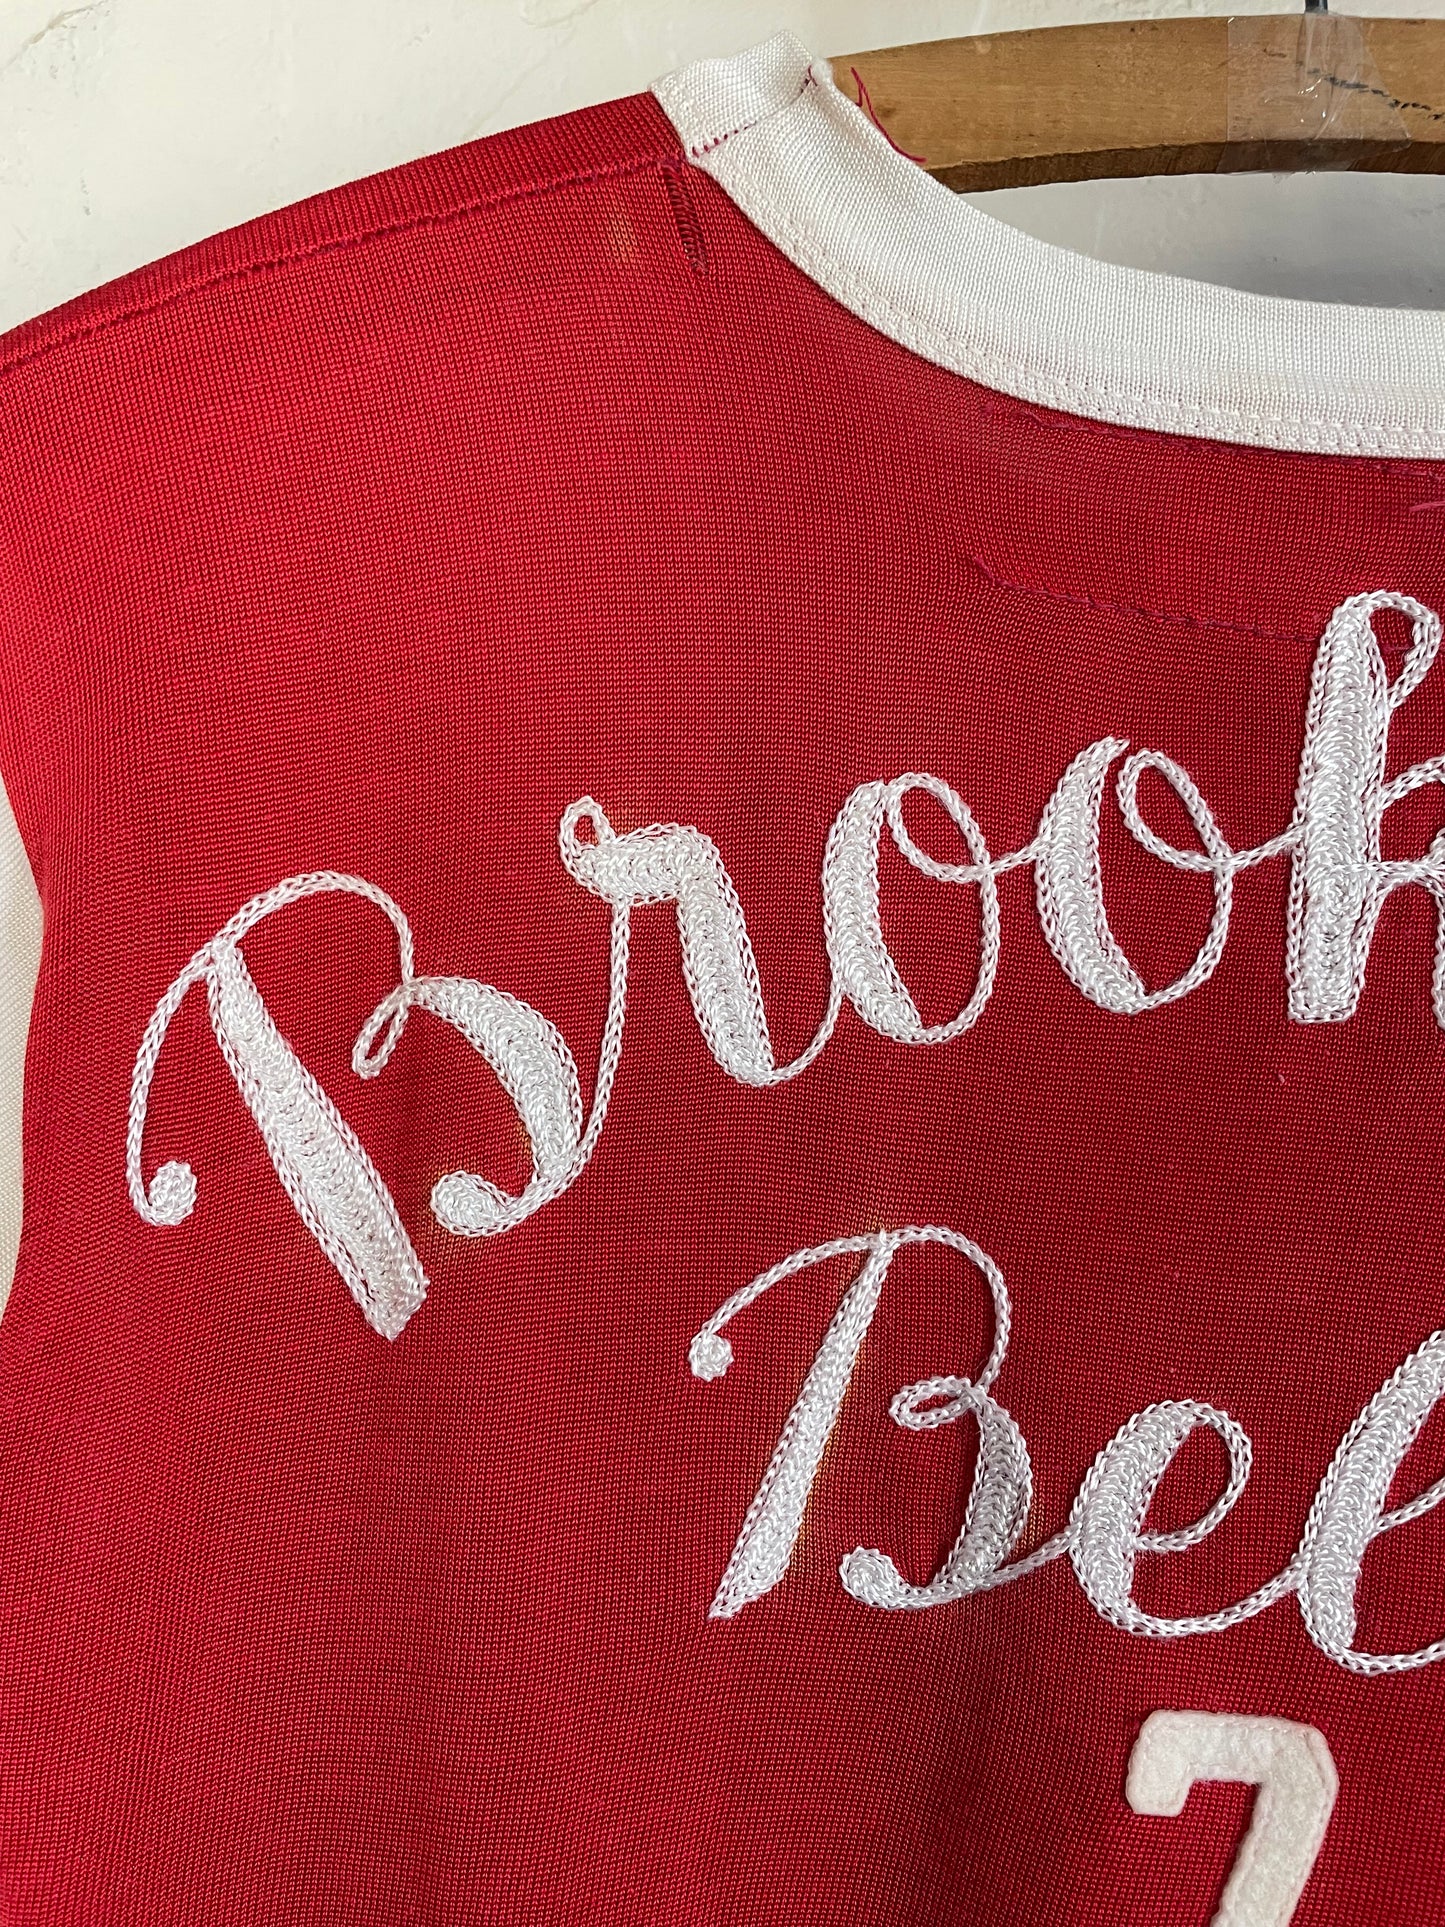 50s Chainstitched Brookeside Bells Tee